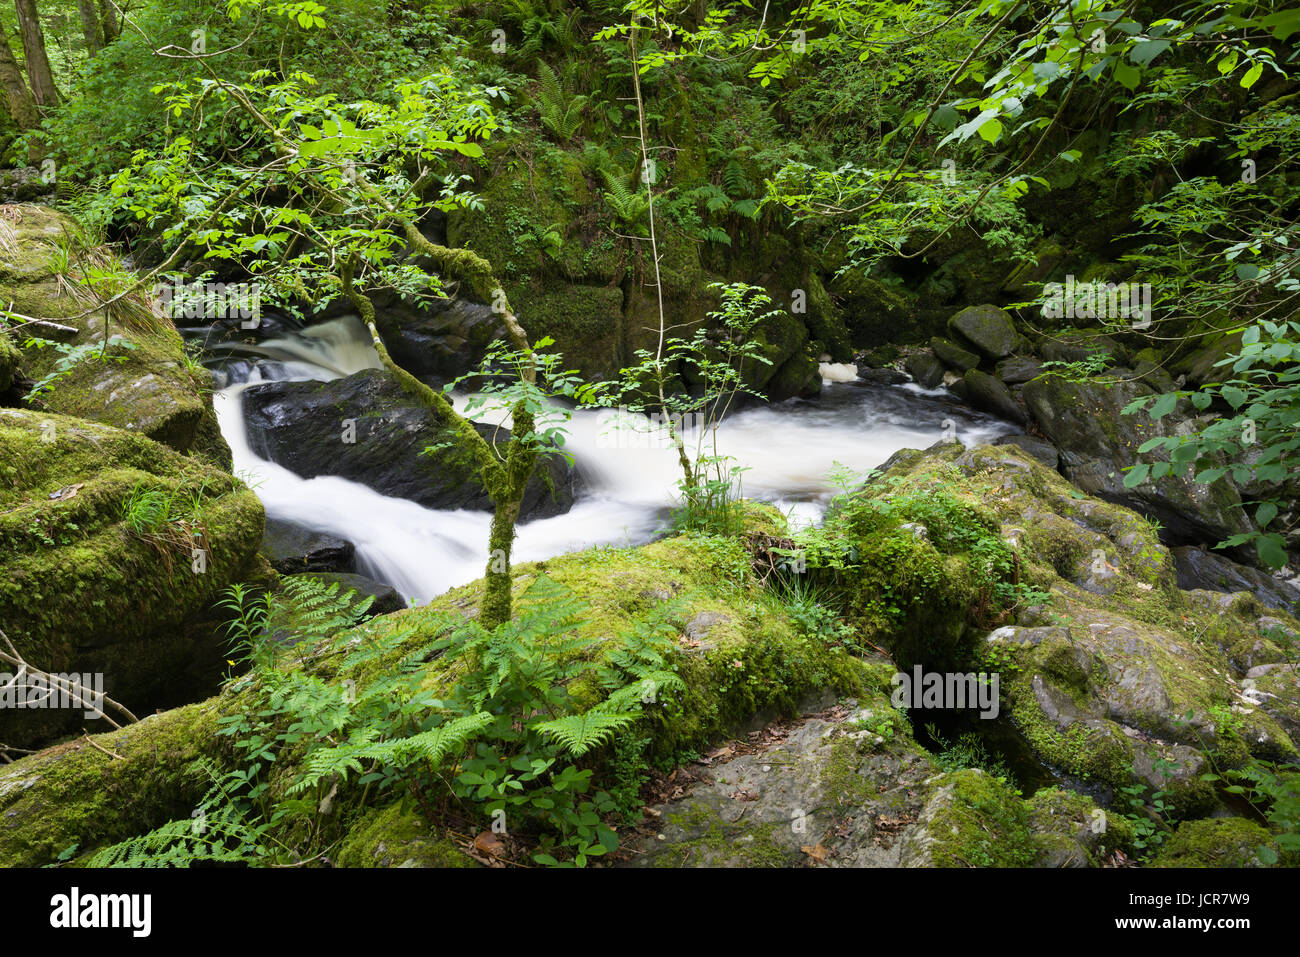 Waterfall on East Lyn River in Barton Wood in Exmoor National Park at Wilsham near Lynmouth, Devon, England. Stock Photo